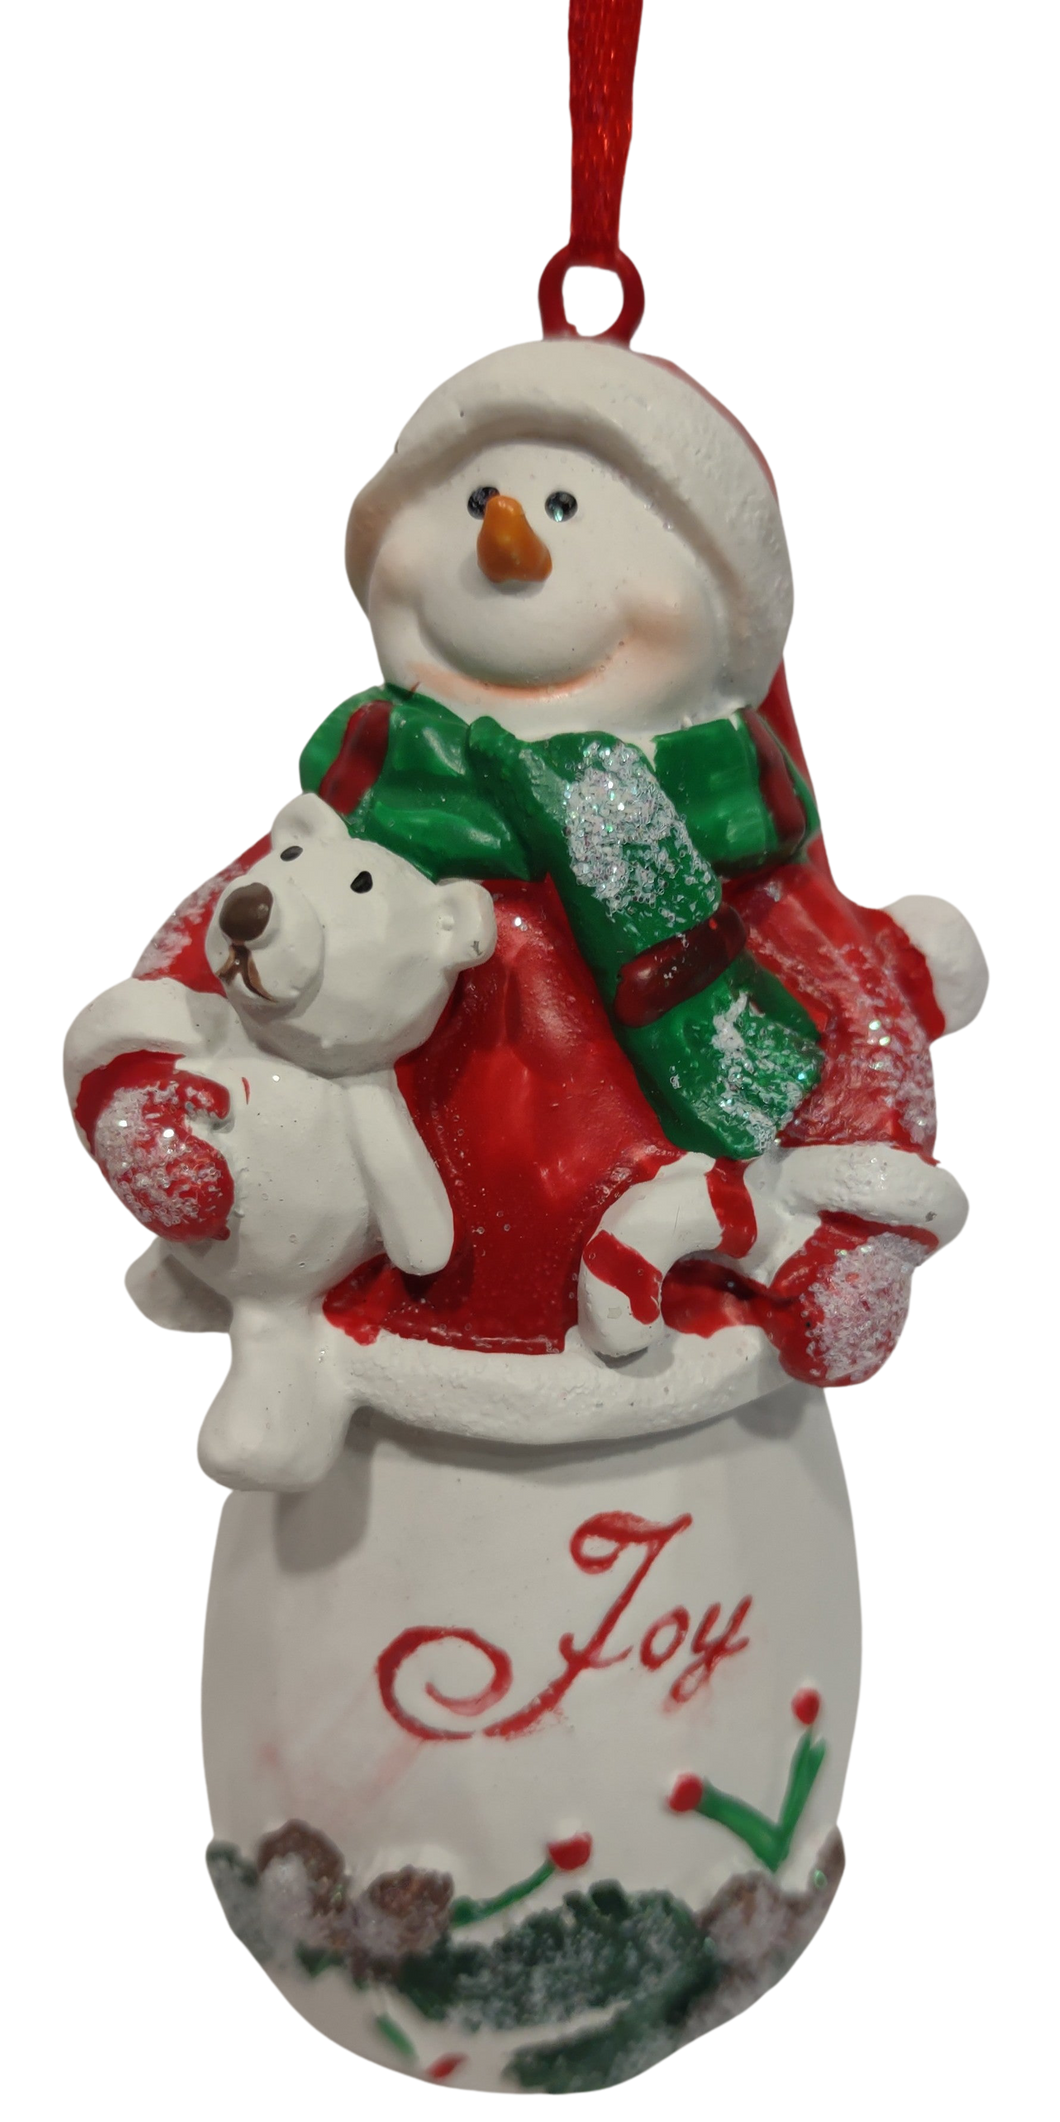 Snowman Ornament with White Bear and Candy Cane - Joy  4.5